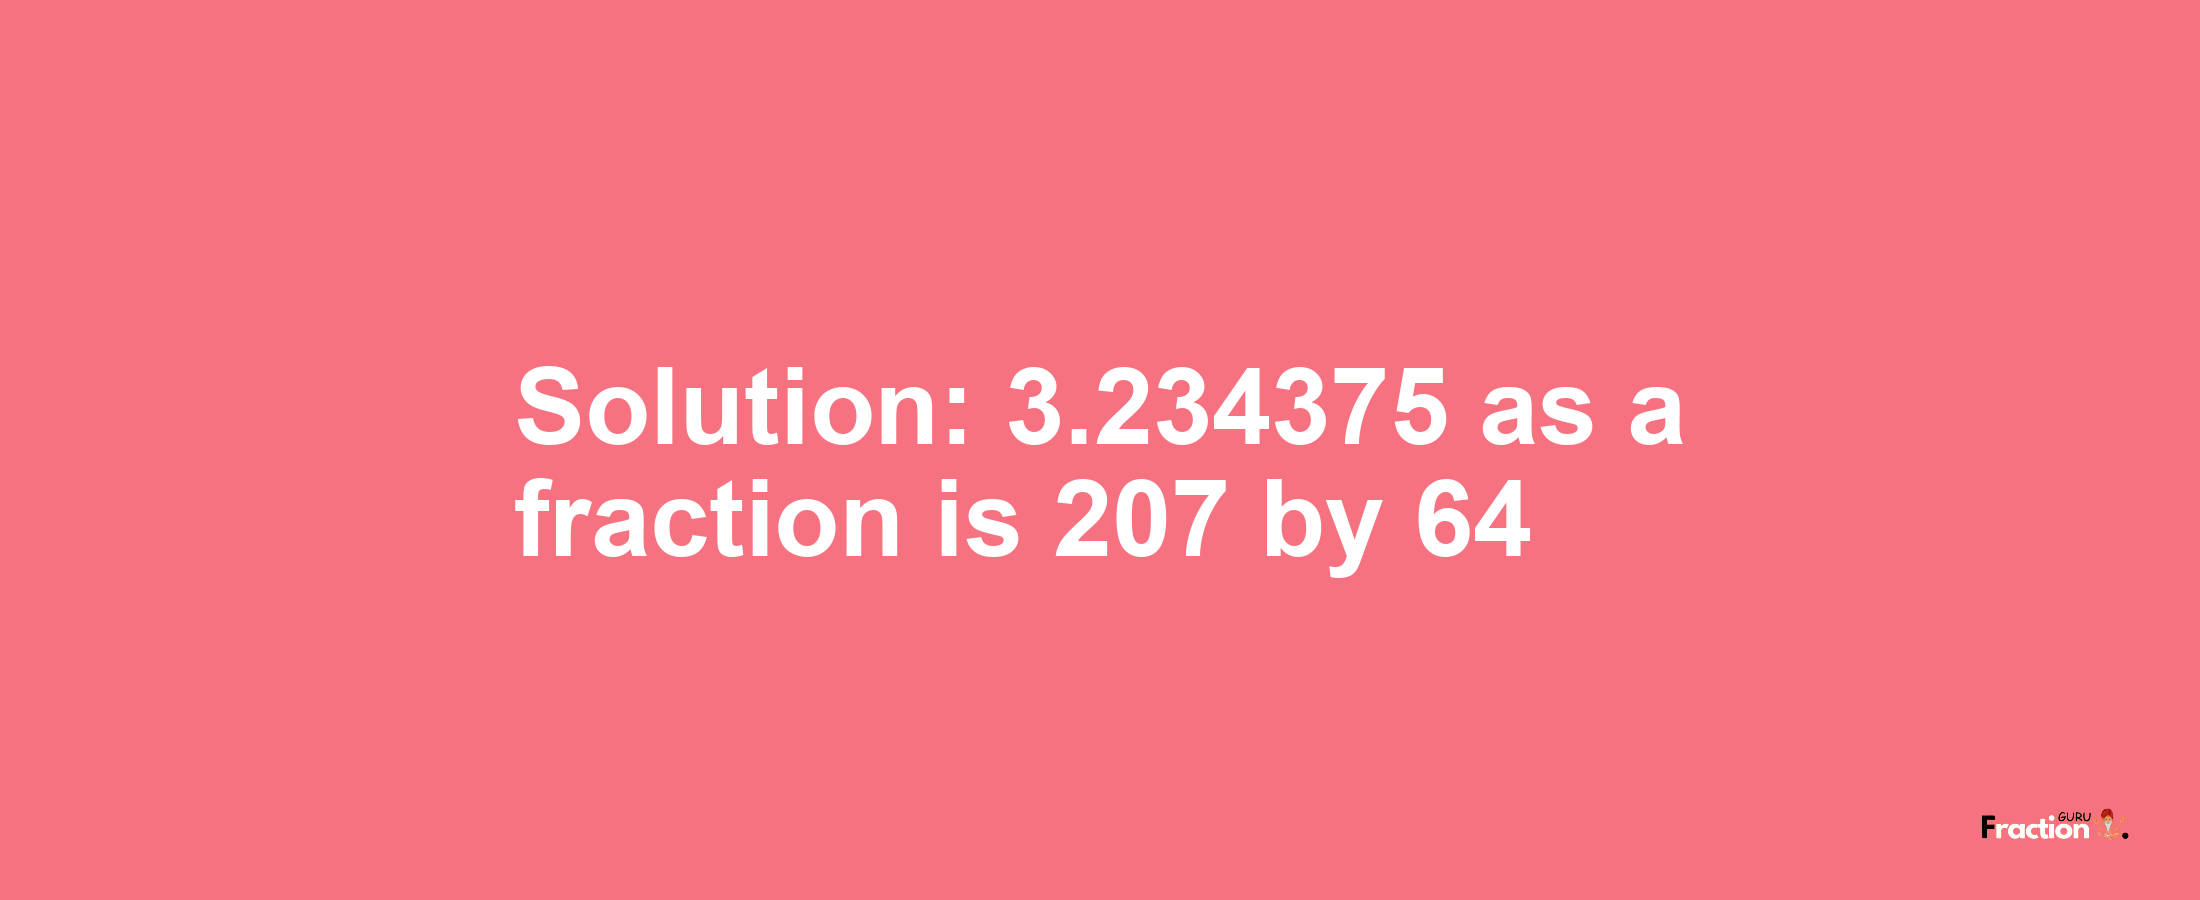 Solution:3.234375 as a fraction is 207/64